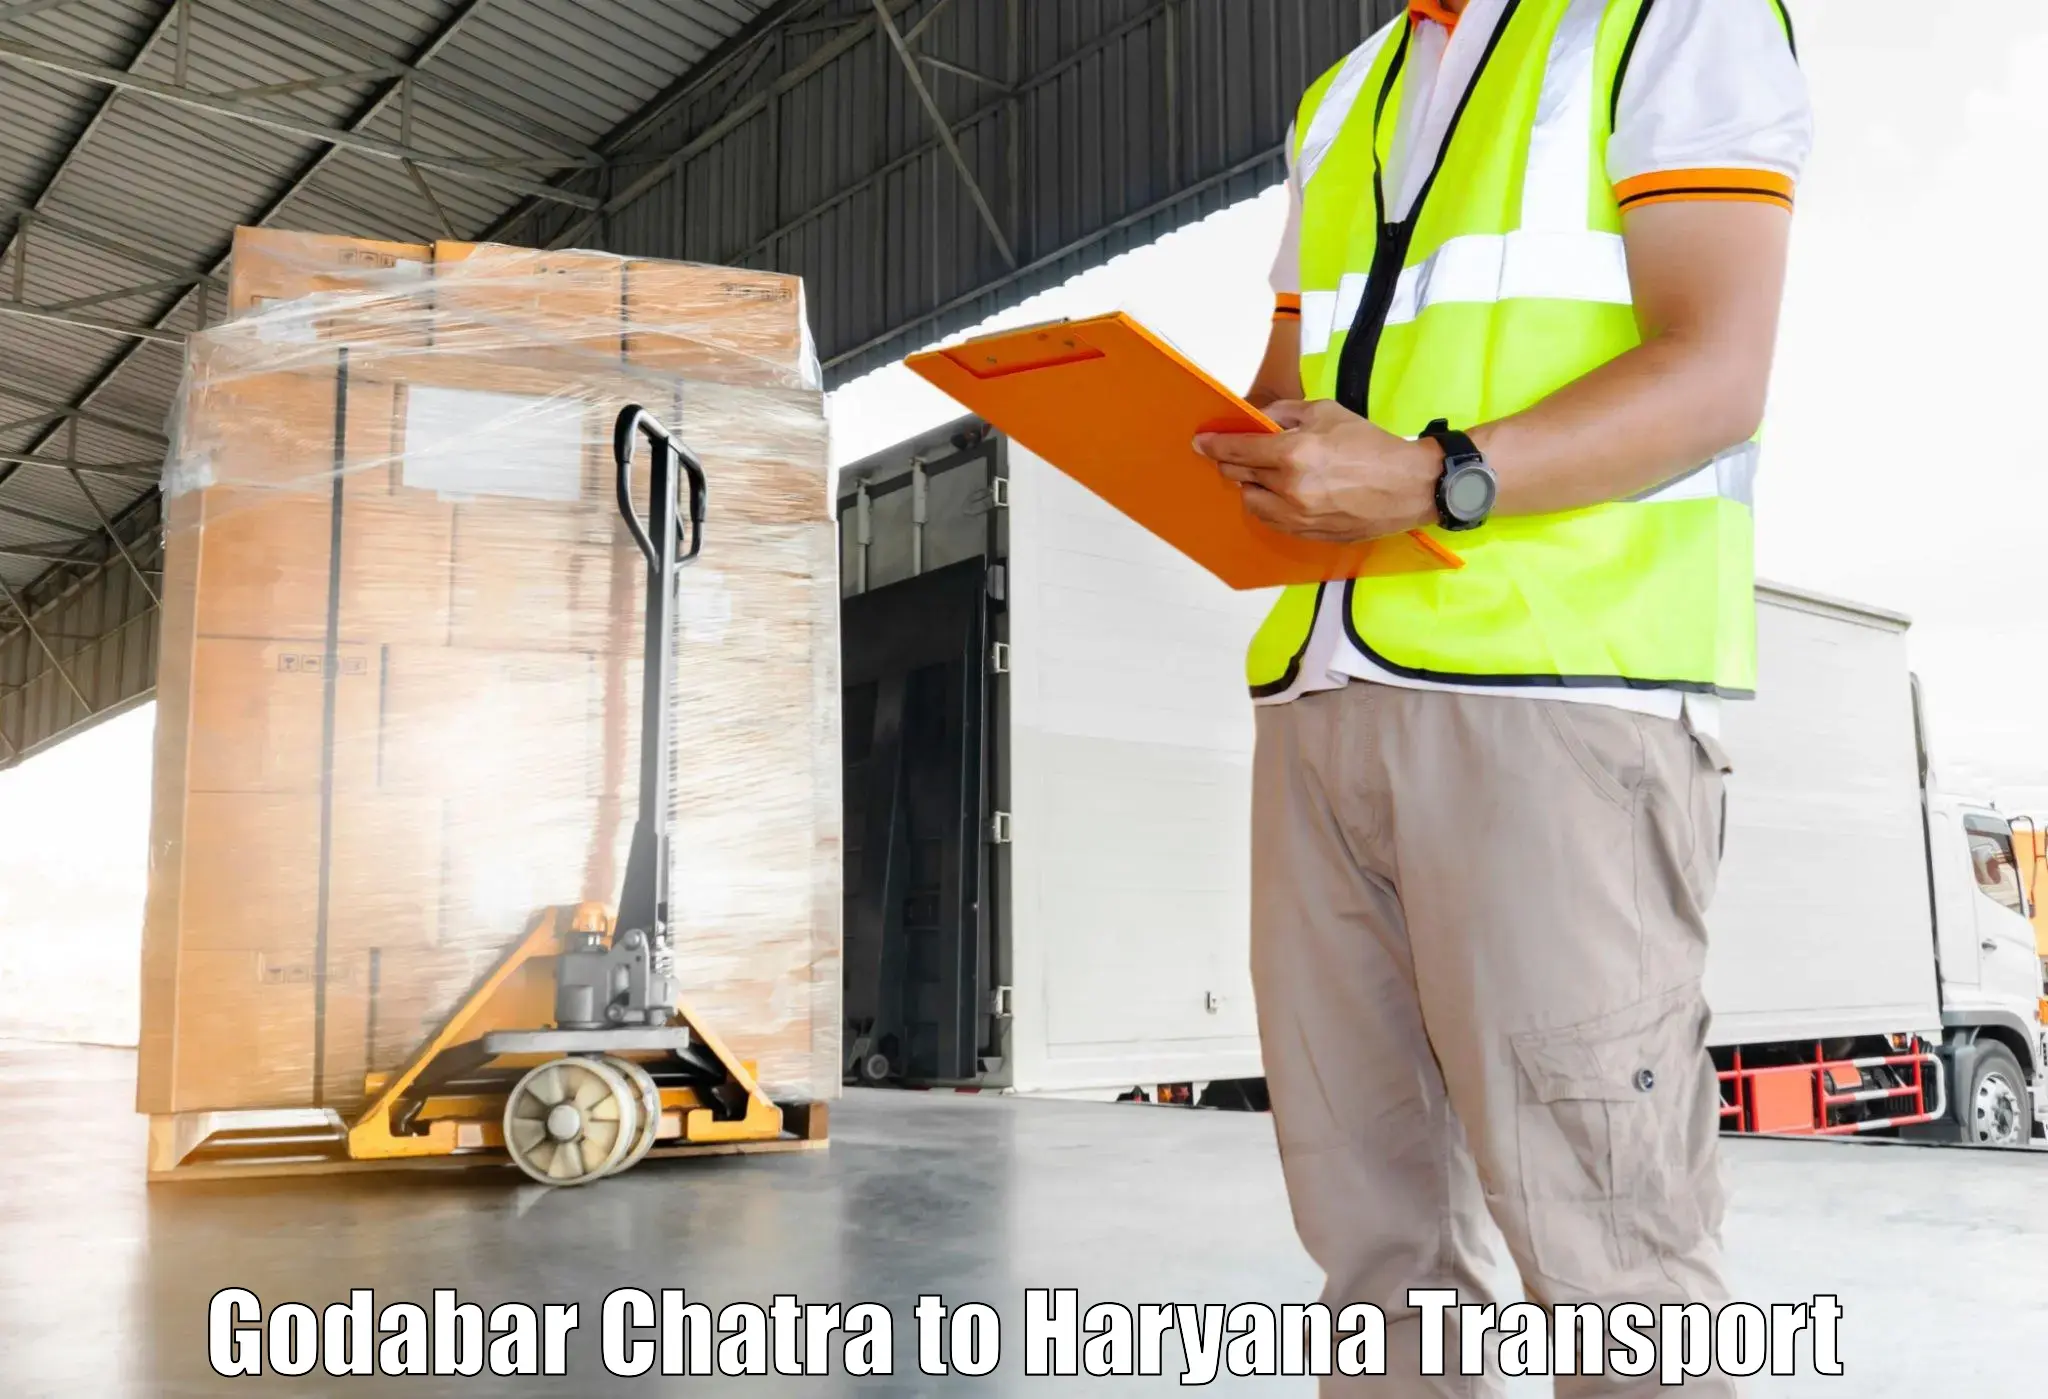 Package delivery services Godabar Chatra to Sonipat